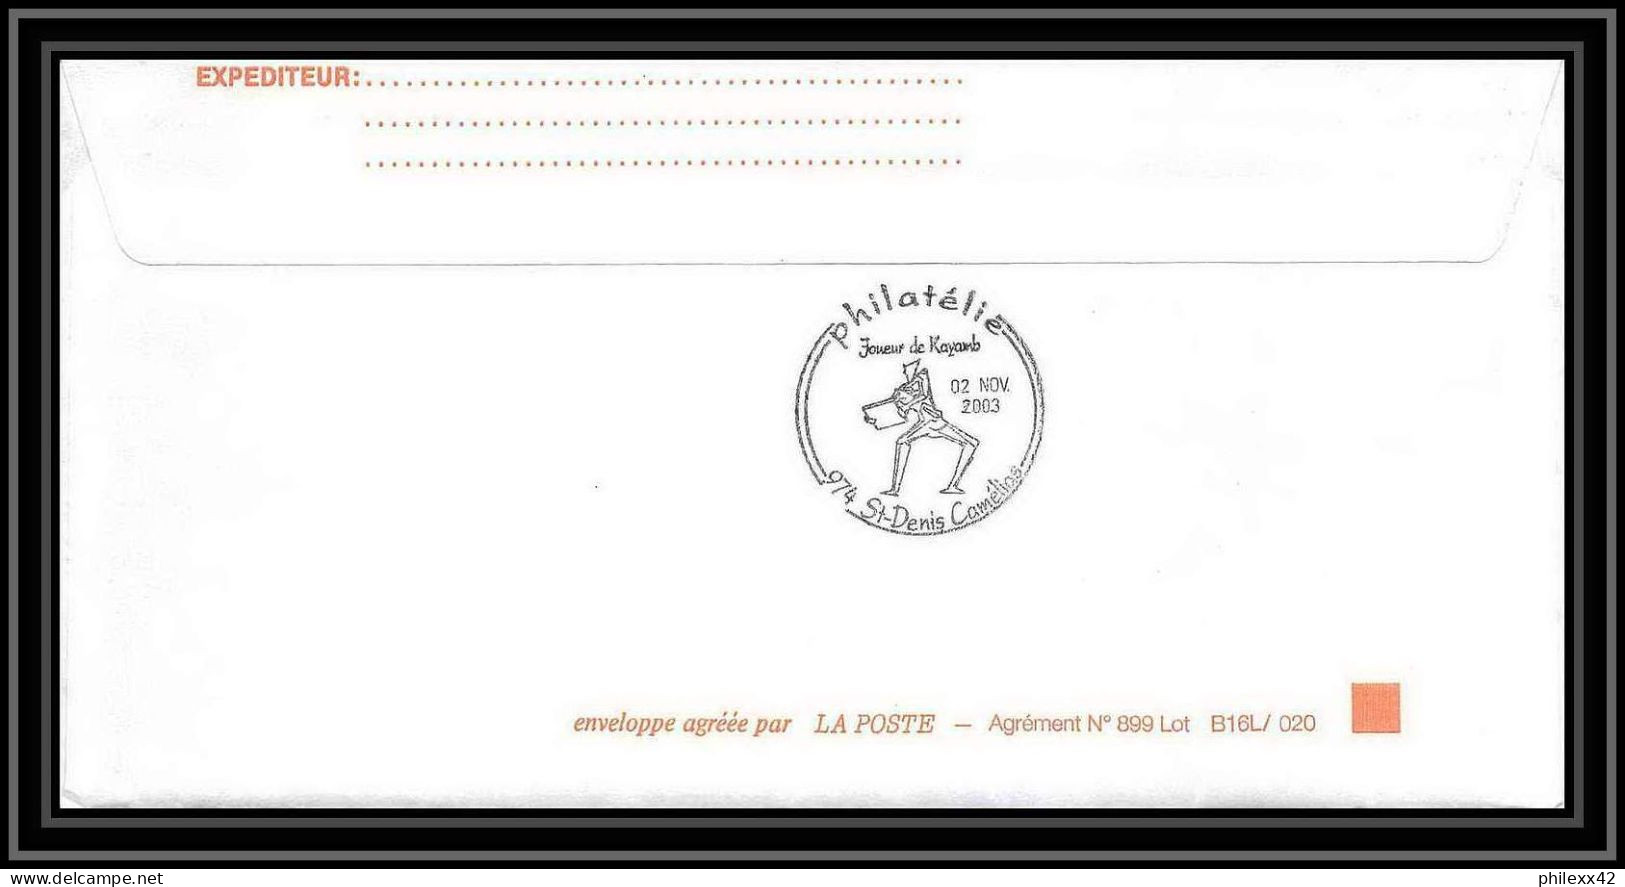 2416 Dufresne 2 Signé Signed Op 2003/3 N°363 12/11/2003 ANTARCTIC Terres Australes (taaf) Lettre Cover - Lettres & Documents